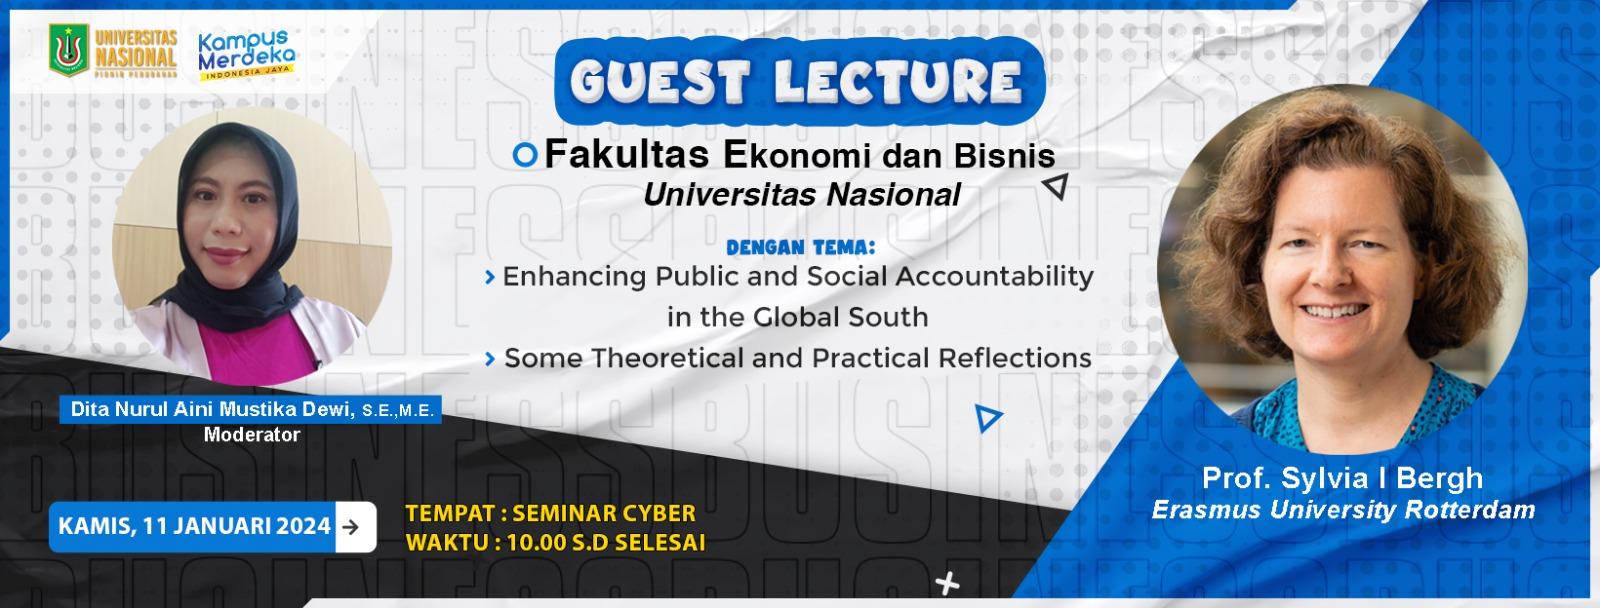 You are currently viewing Guest Lecture with Prof Sylvia I. Bergh (Erasmus University Rotterdam) titled “Enhancing Public and Social Accountability in the Global South: Some Theoretical and Practical Reflections”